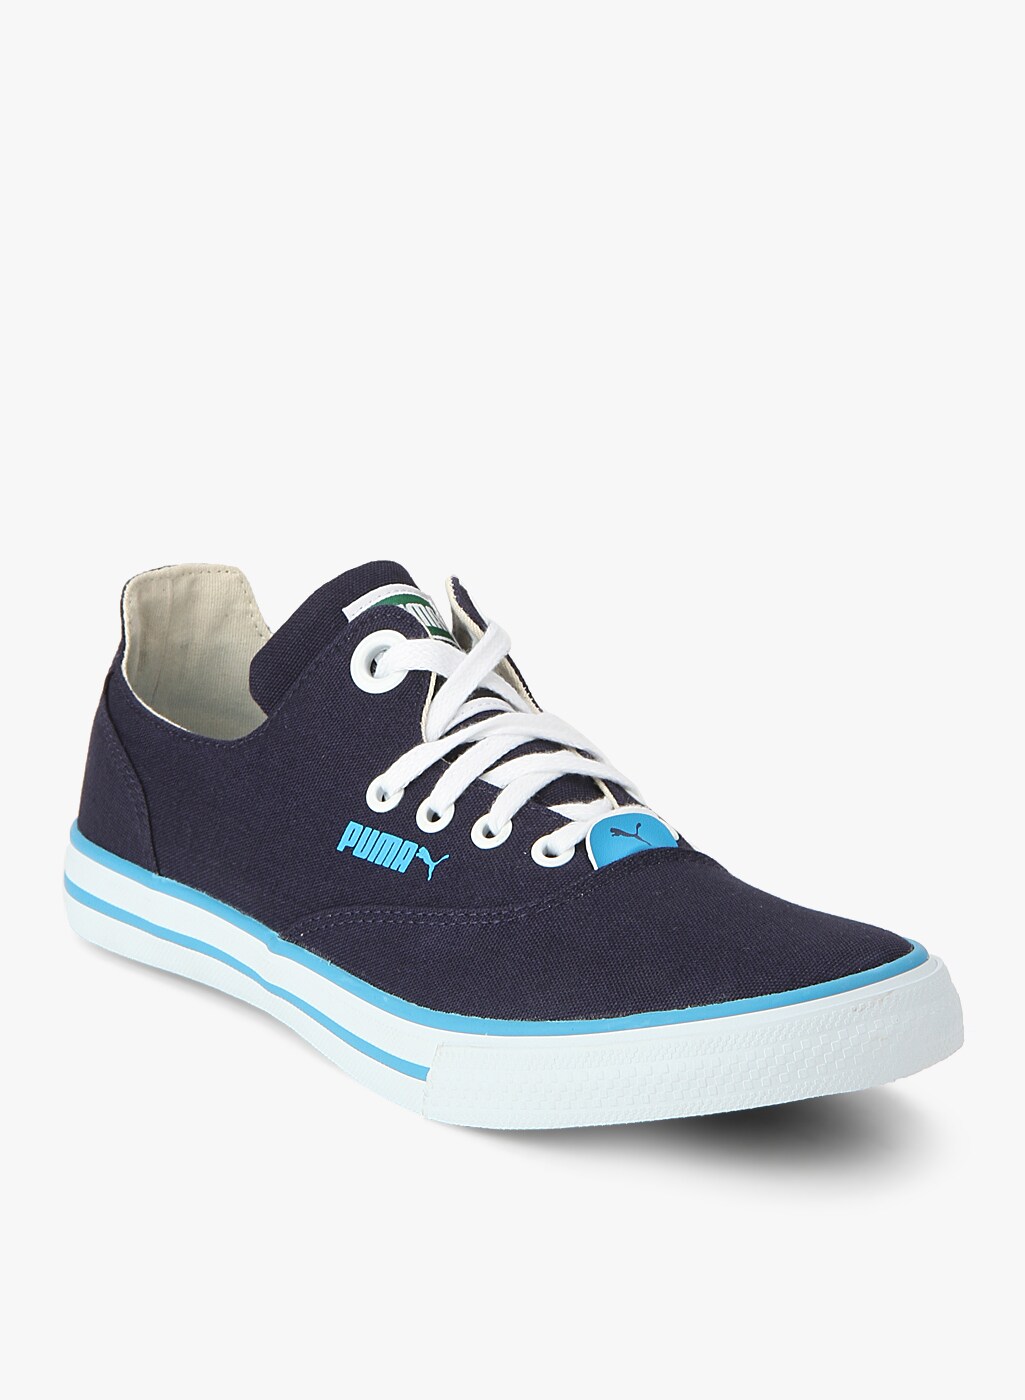 puma limnos cat blue sneakers off 59 